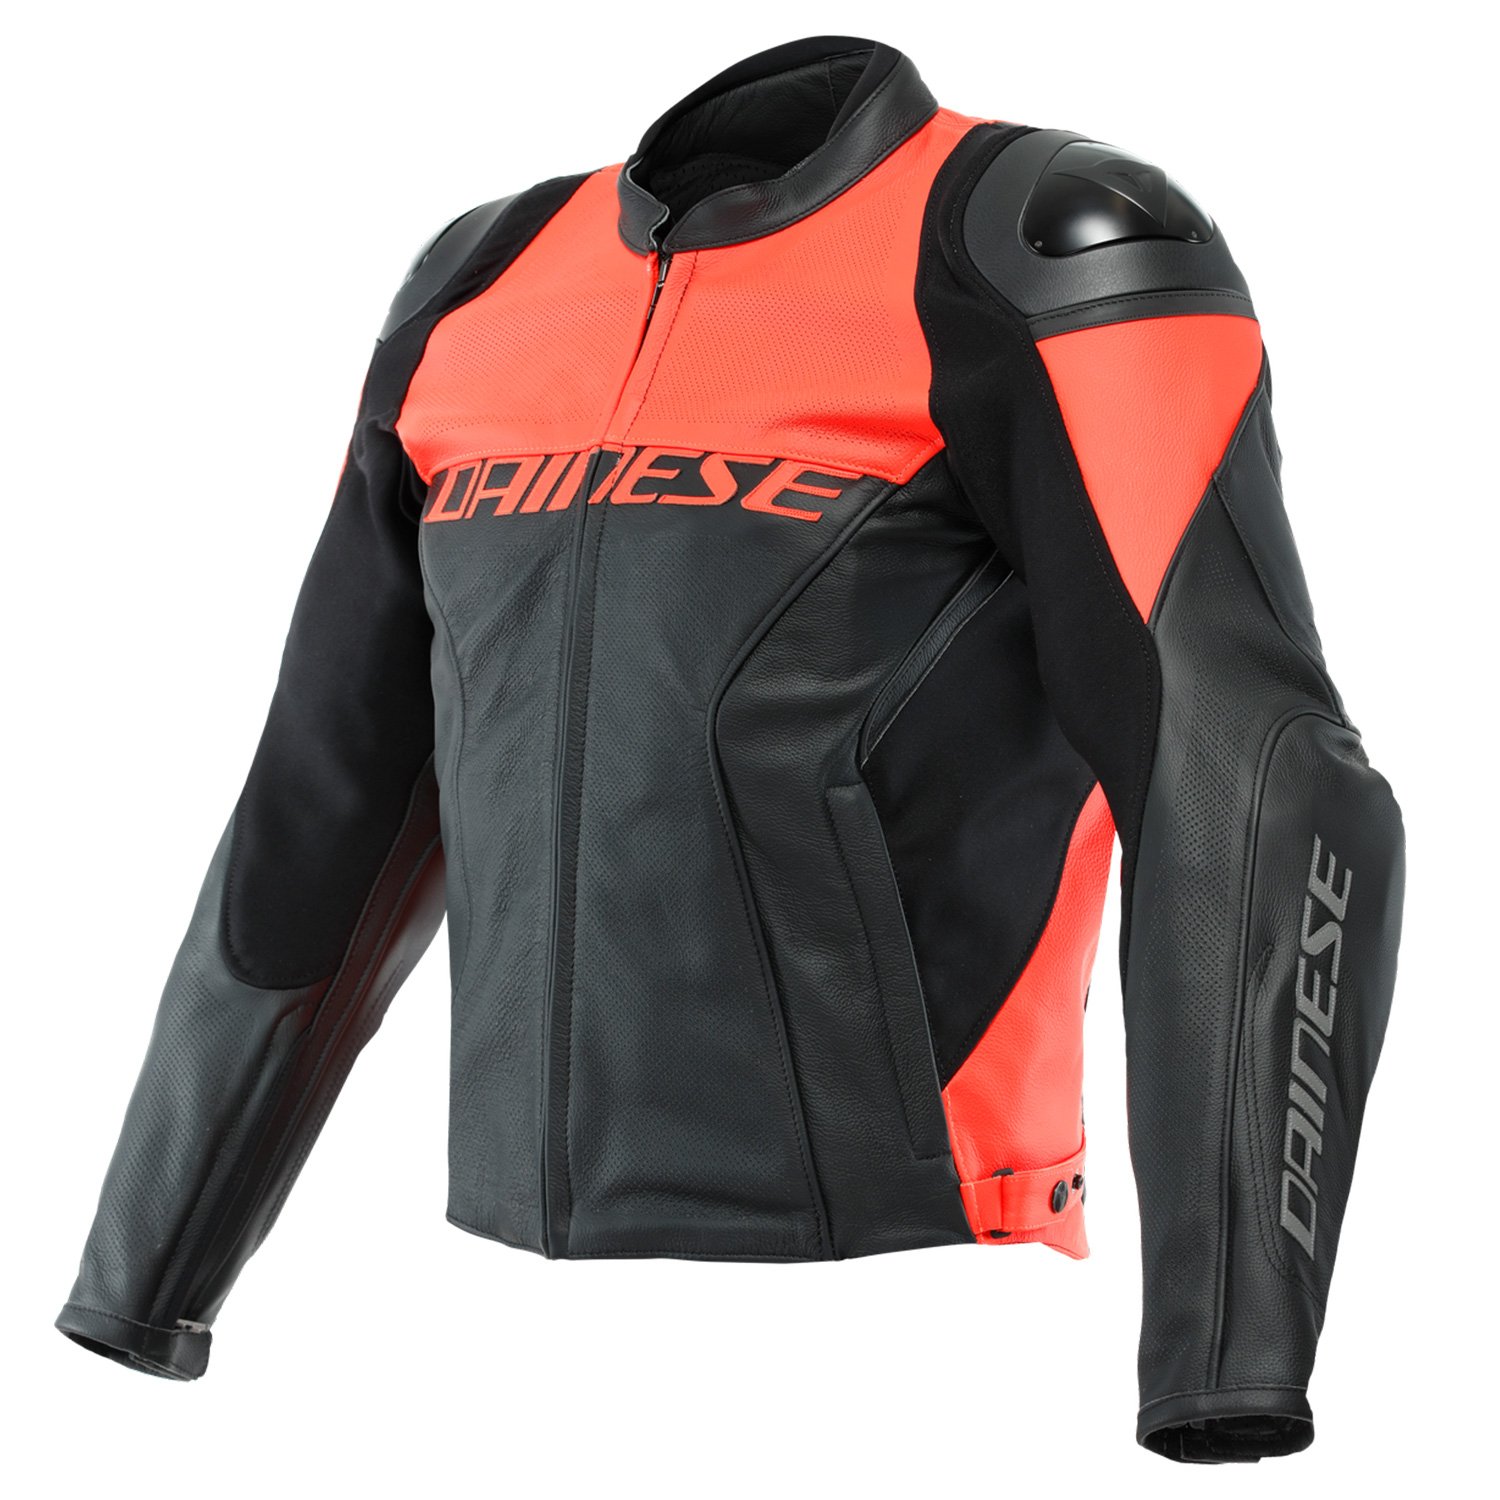 Image of Dainese Racing 4 Perforated Leather Schwarz Fluo Rot Jacke Größe 56